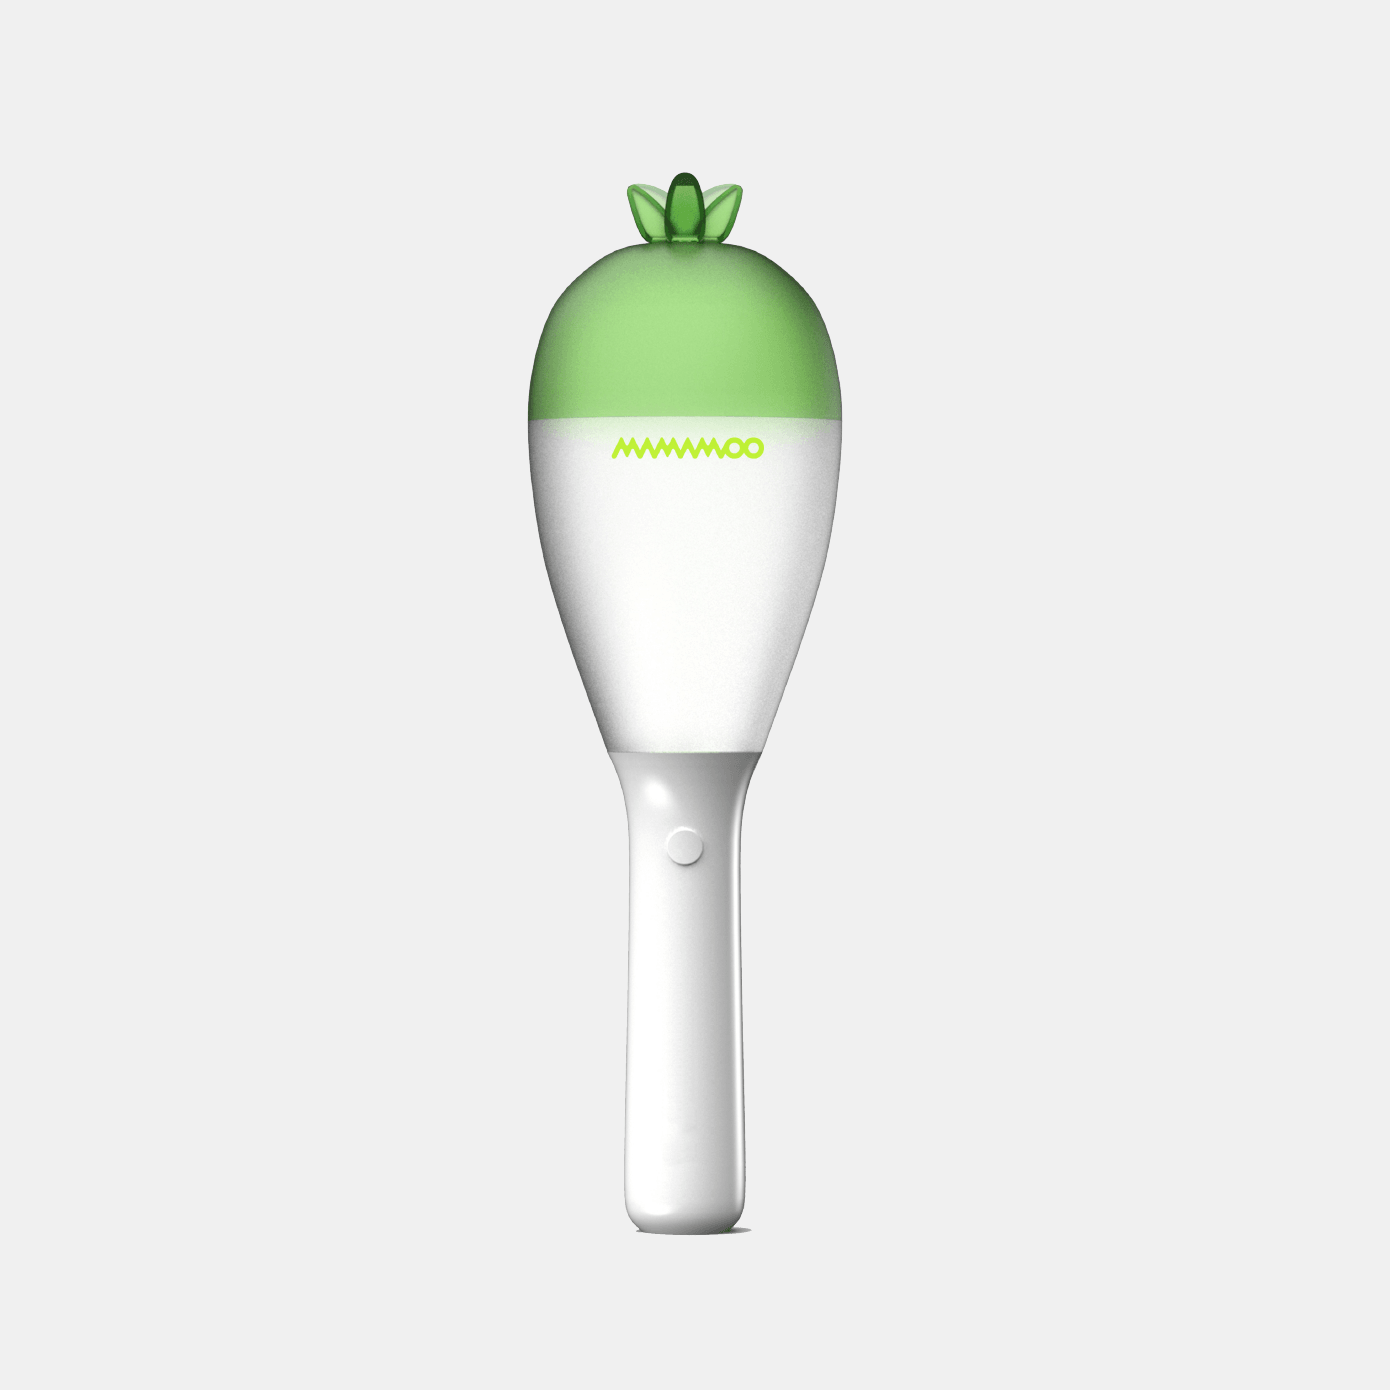 MAMAMOO - OFFICIAL LIGHT STICK VER 2.5 - Shopping Around the World with Goodsnjoy